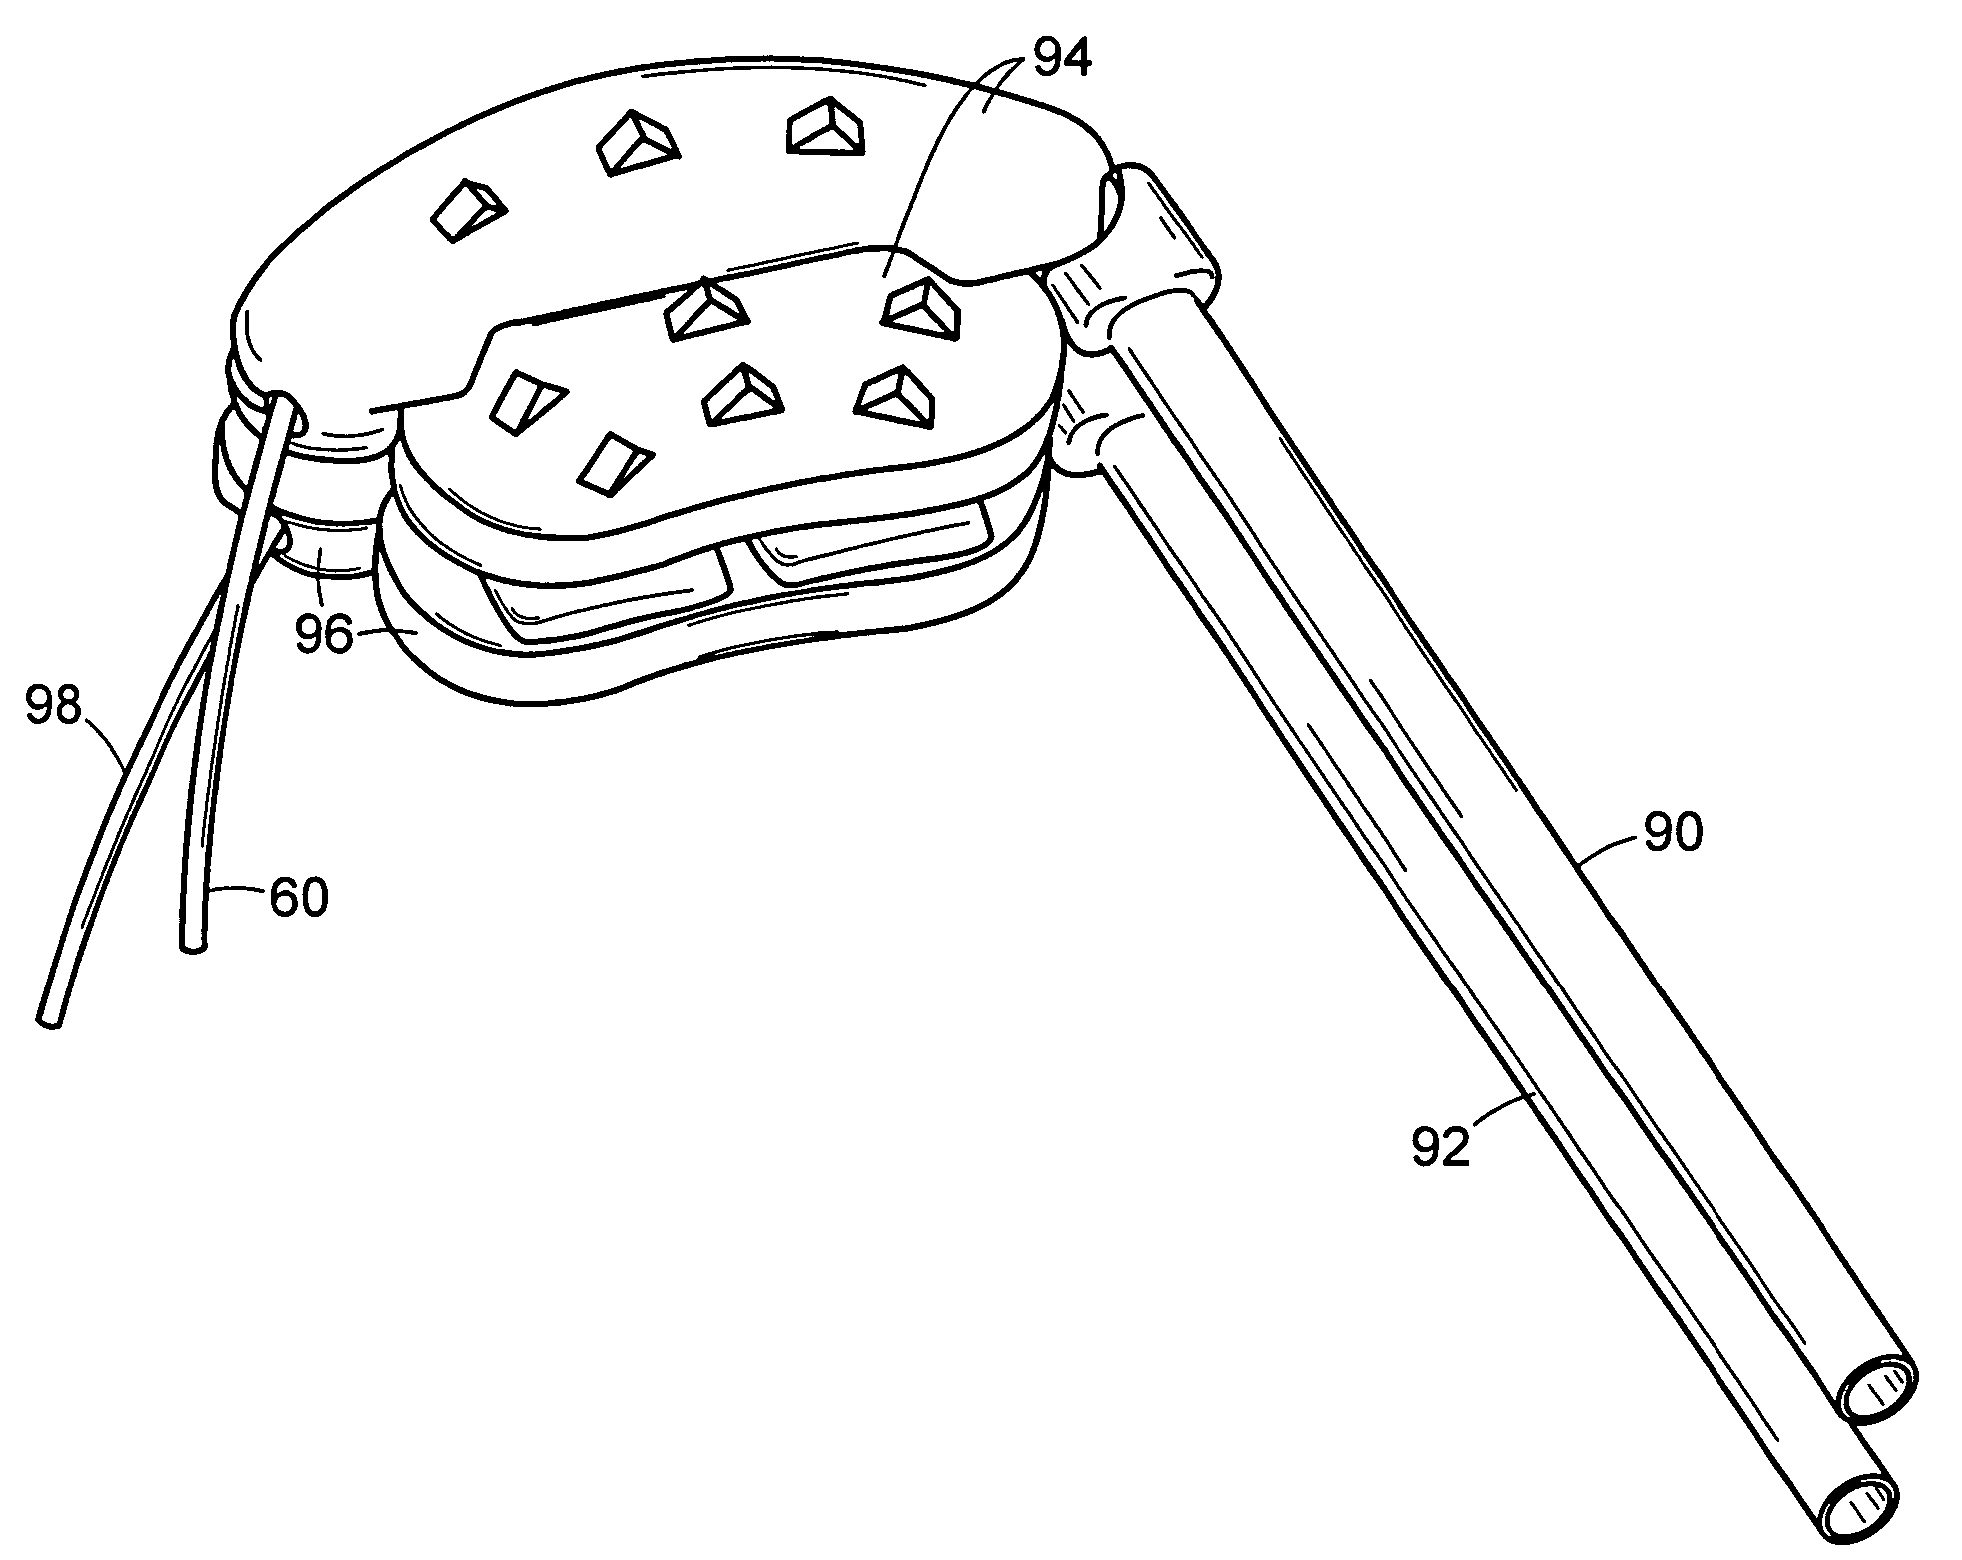 Intervertebral prosthetic disc and method for installing using a guidewire